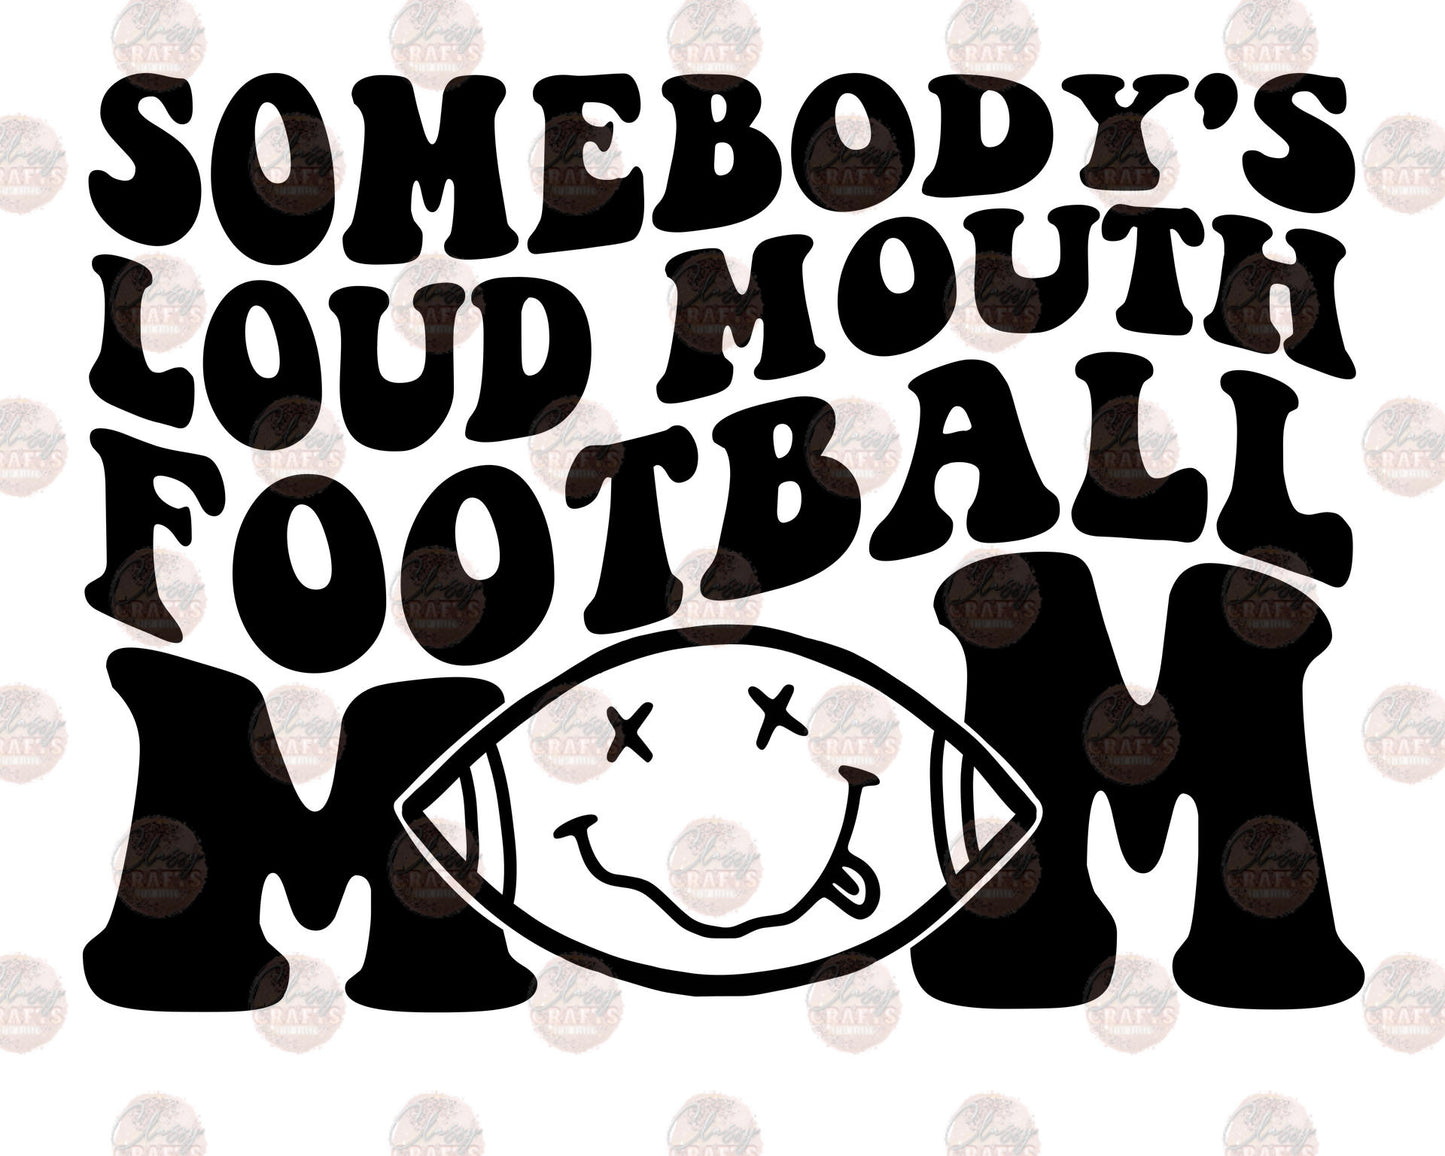 Somebody's Loud Mouth Football Mom 1 Transfer